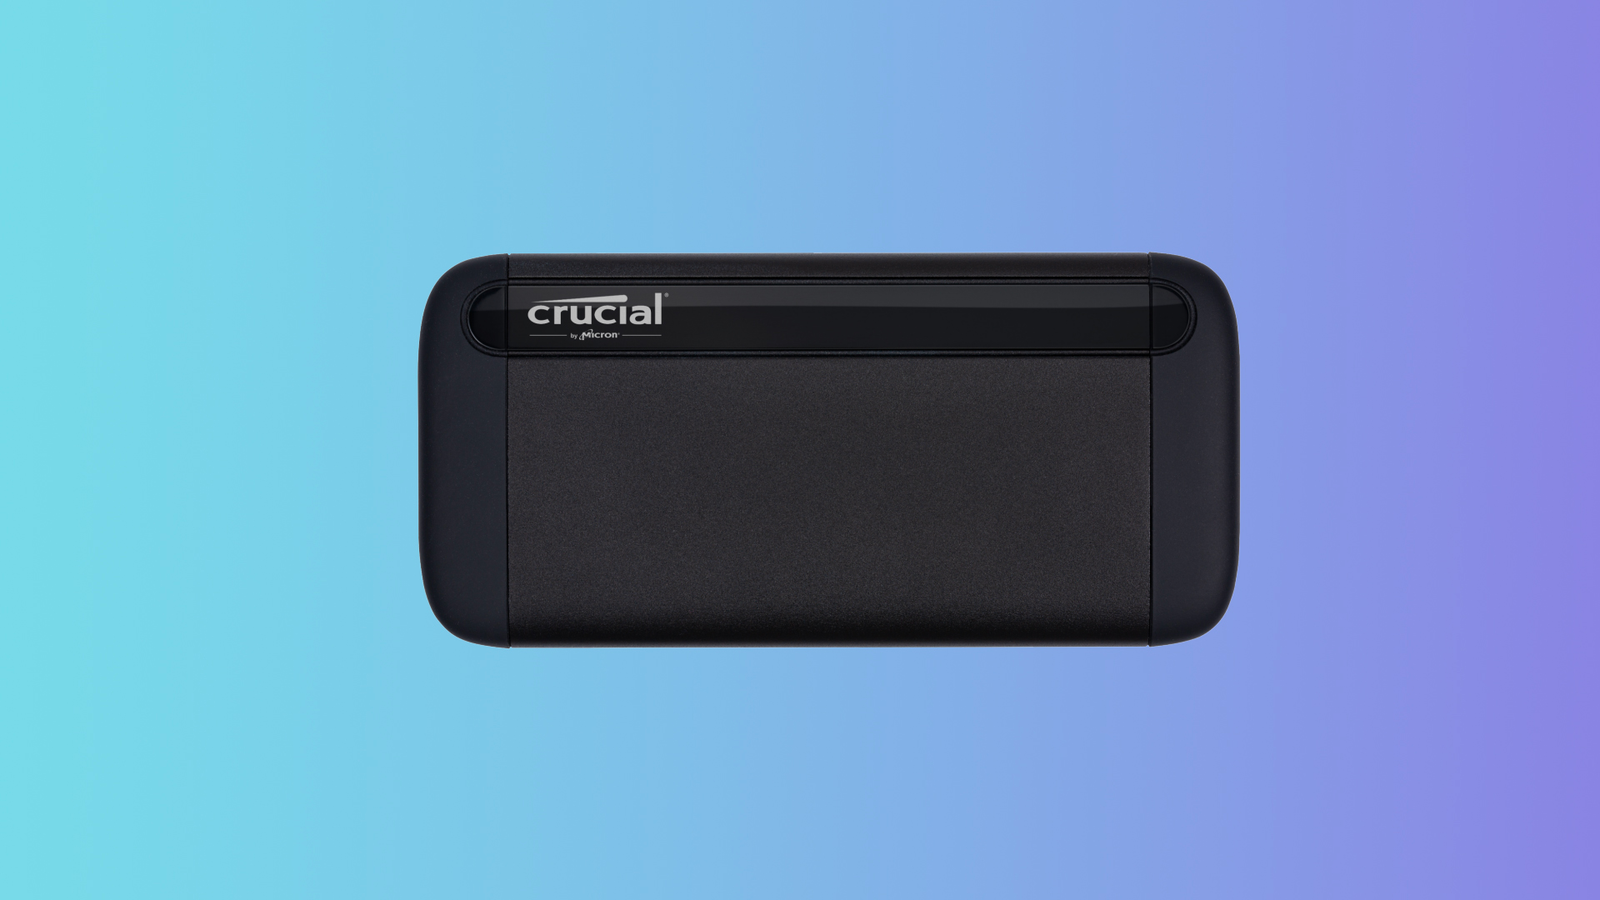 Crucial X8 Portable SSD review: An affordable USB drive for